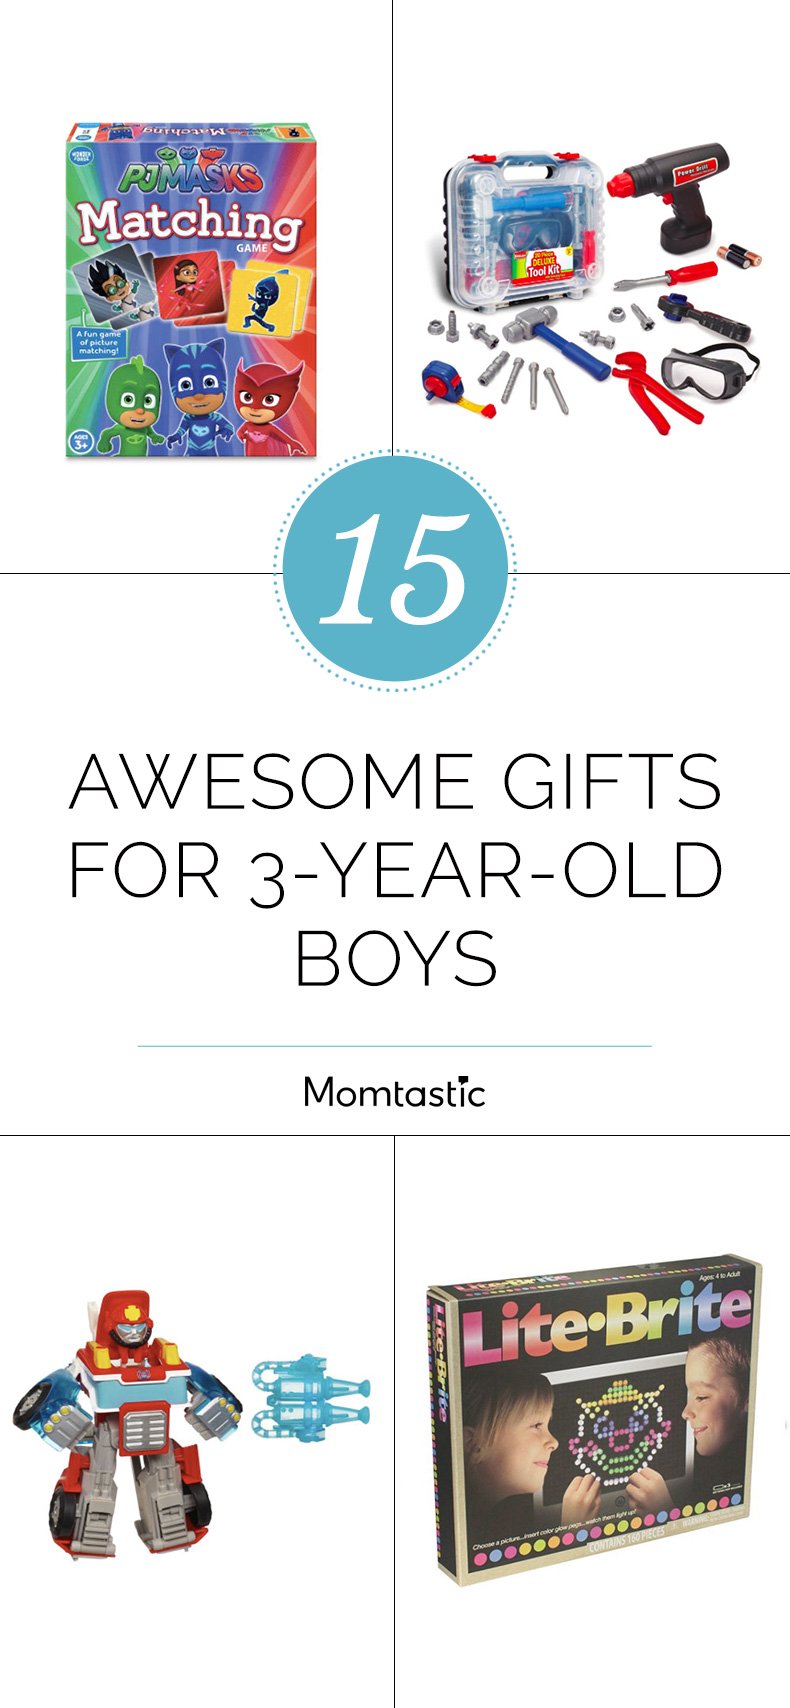 15 Awesome Gifts For 3-Year-Old Boys